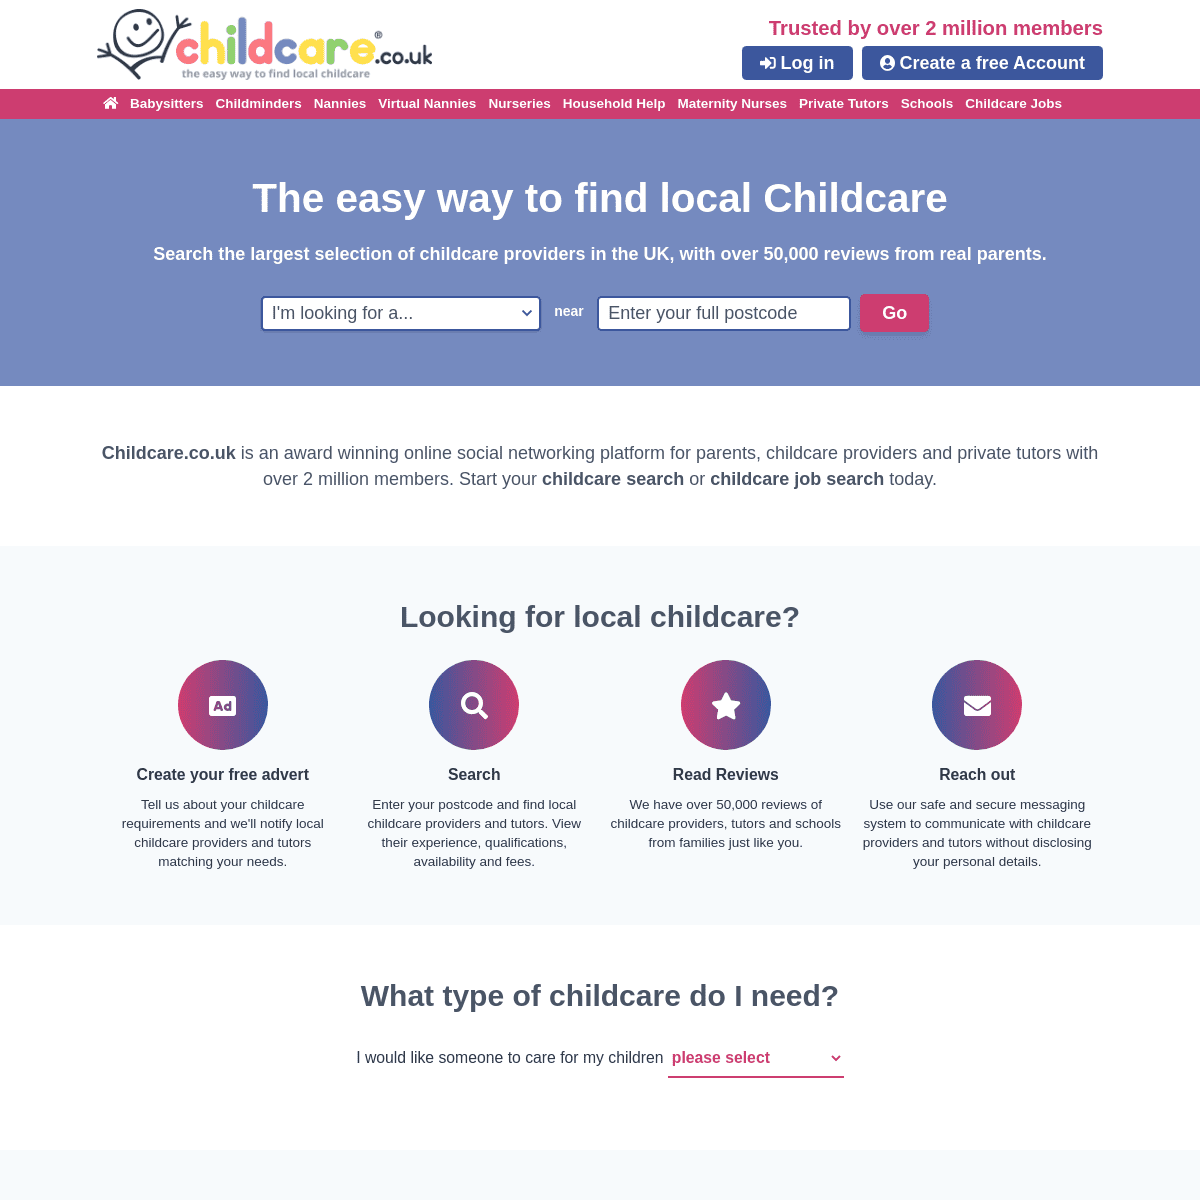 A complete backup of https://childcare.co.uk